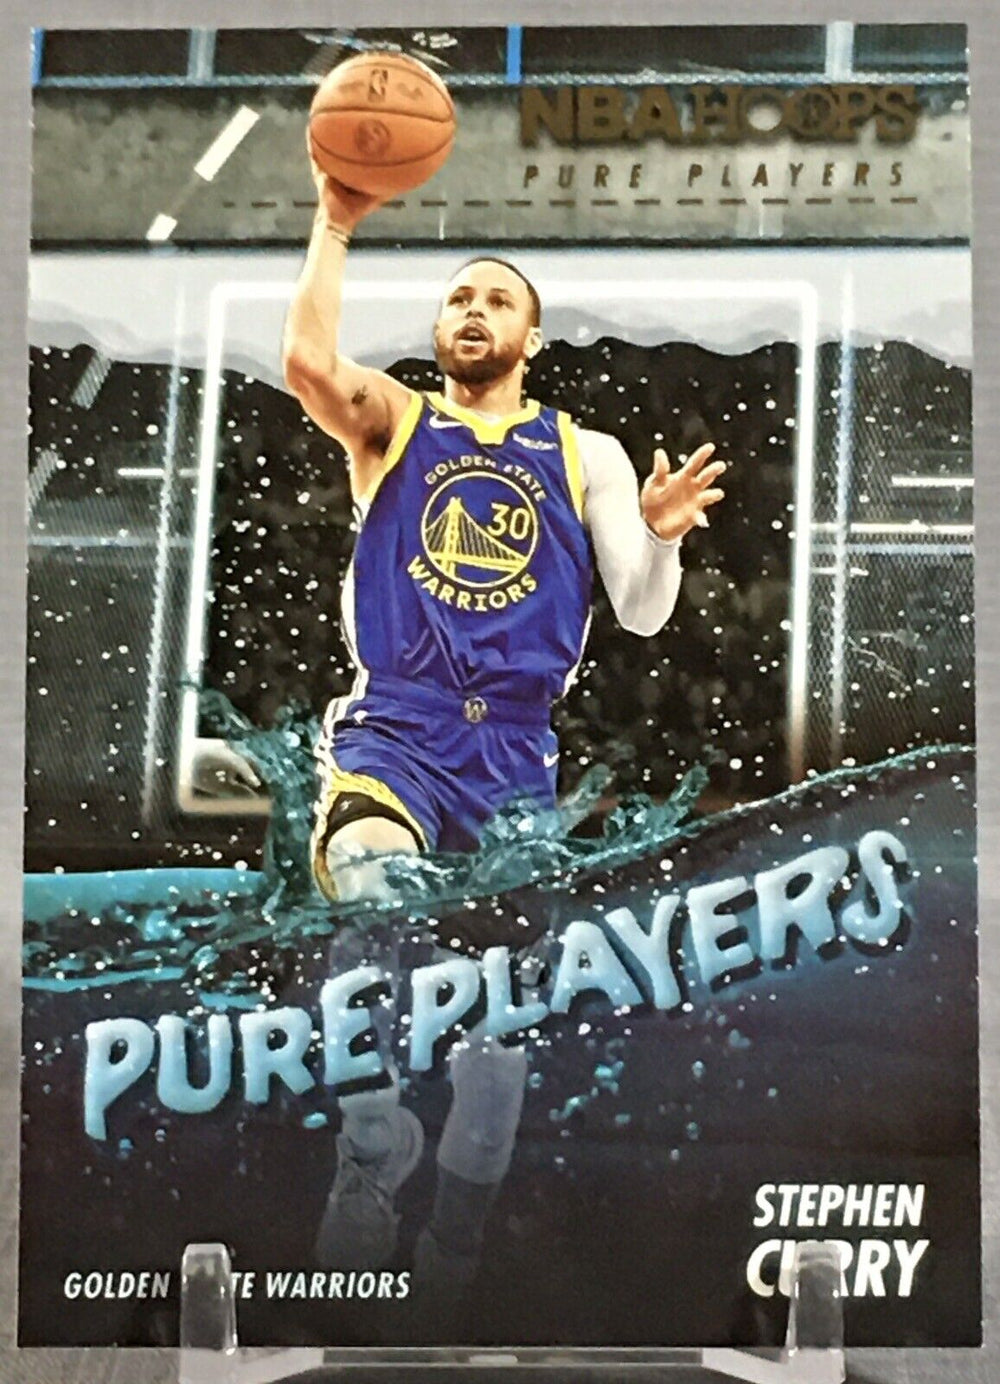 Stephen Curry 2023 2024 Hoops Pure Players Winter Series Mint Card #9